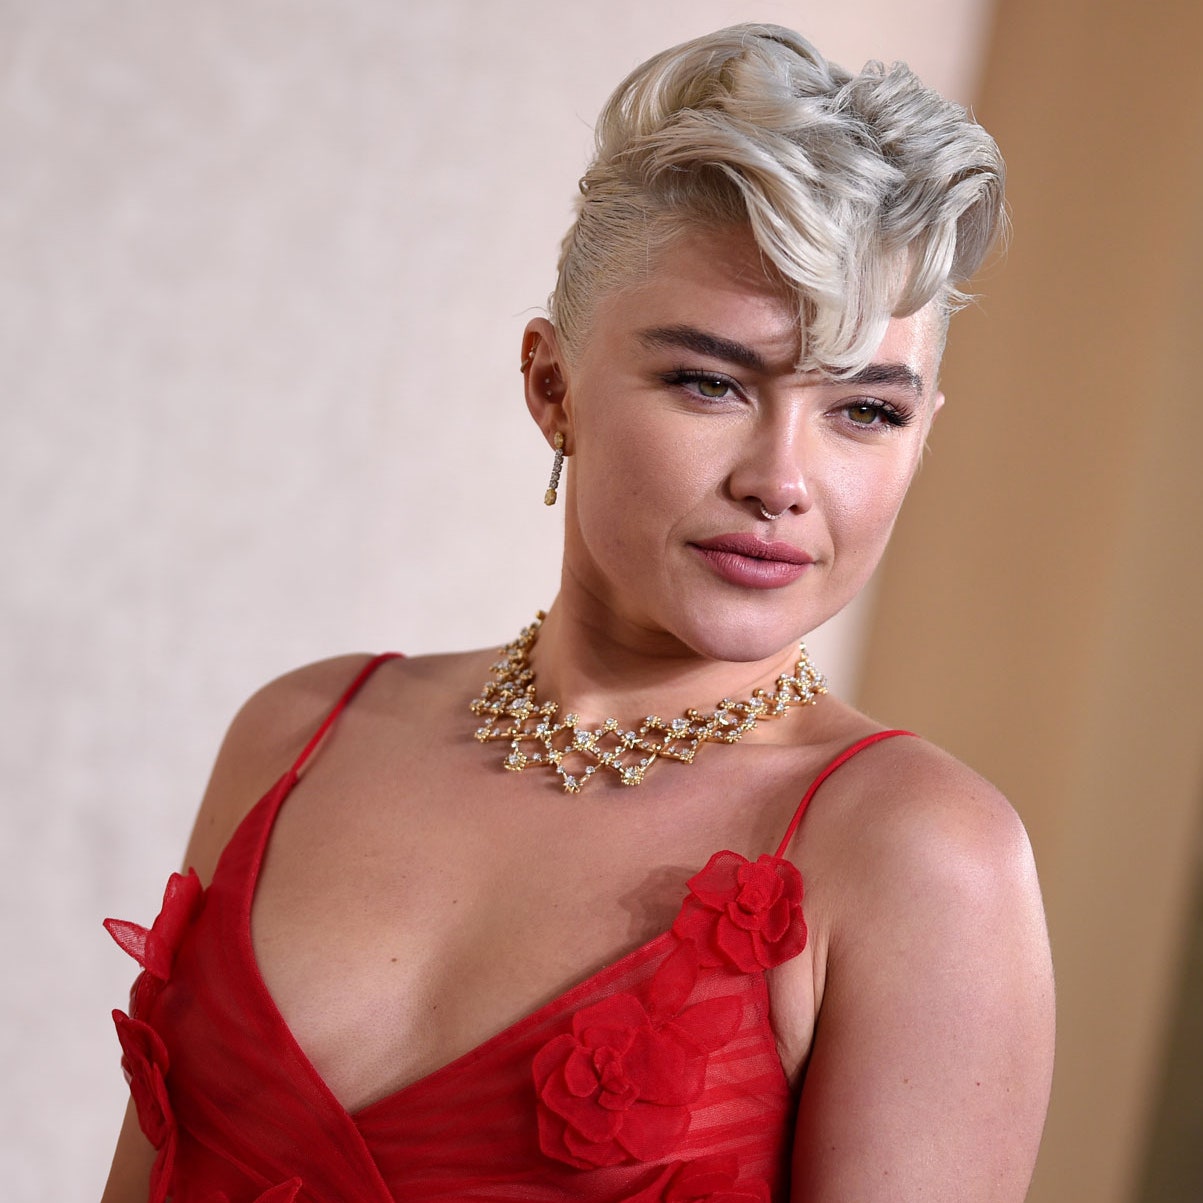 Florence Pugh wore the tallest platforms I've ever seen to the Golden Globes